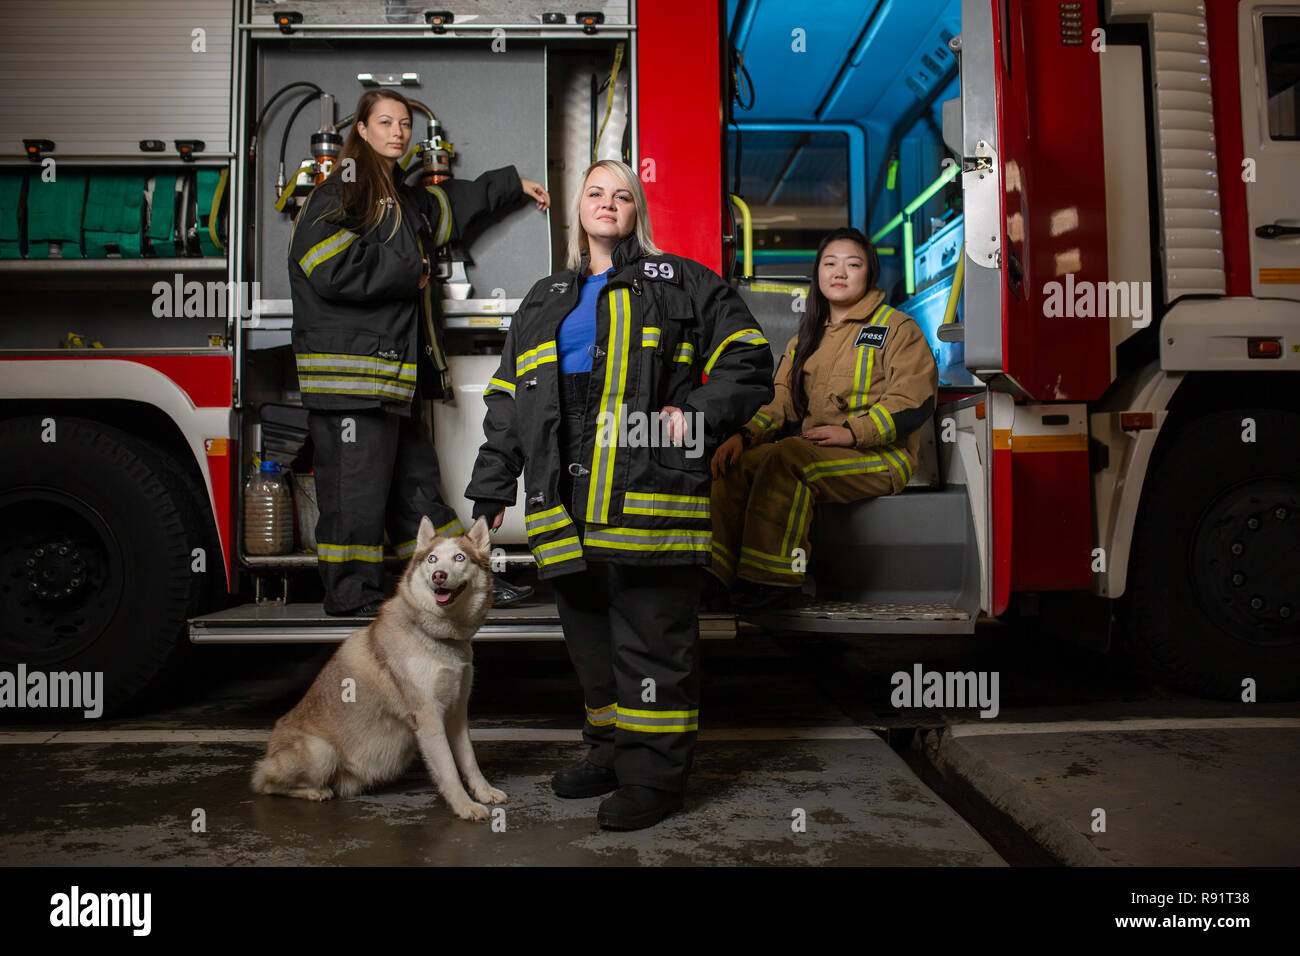 Photo of three women firefighters and dog on background of fire truck Stock Photo